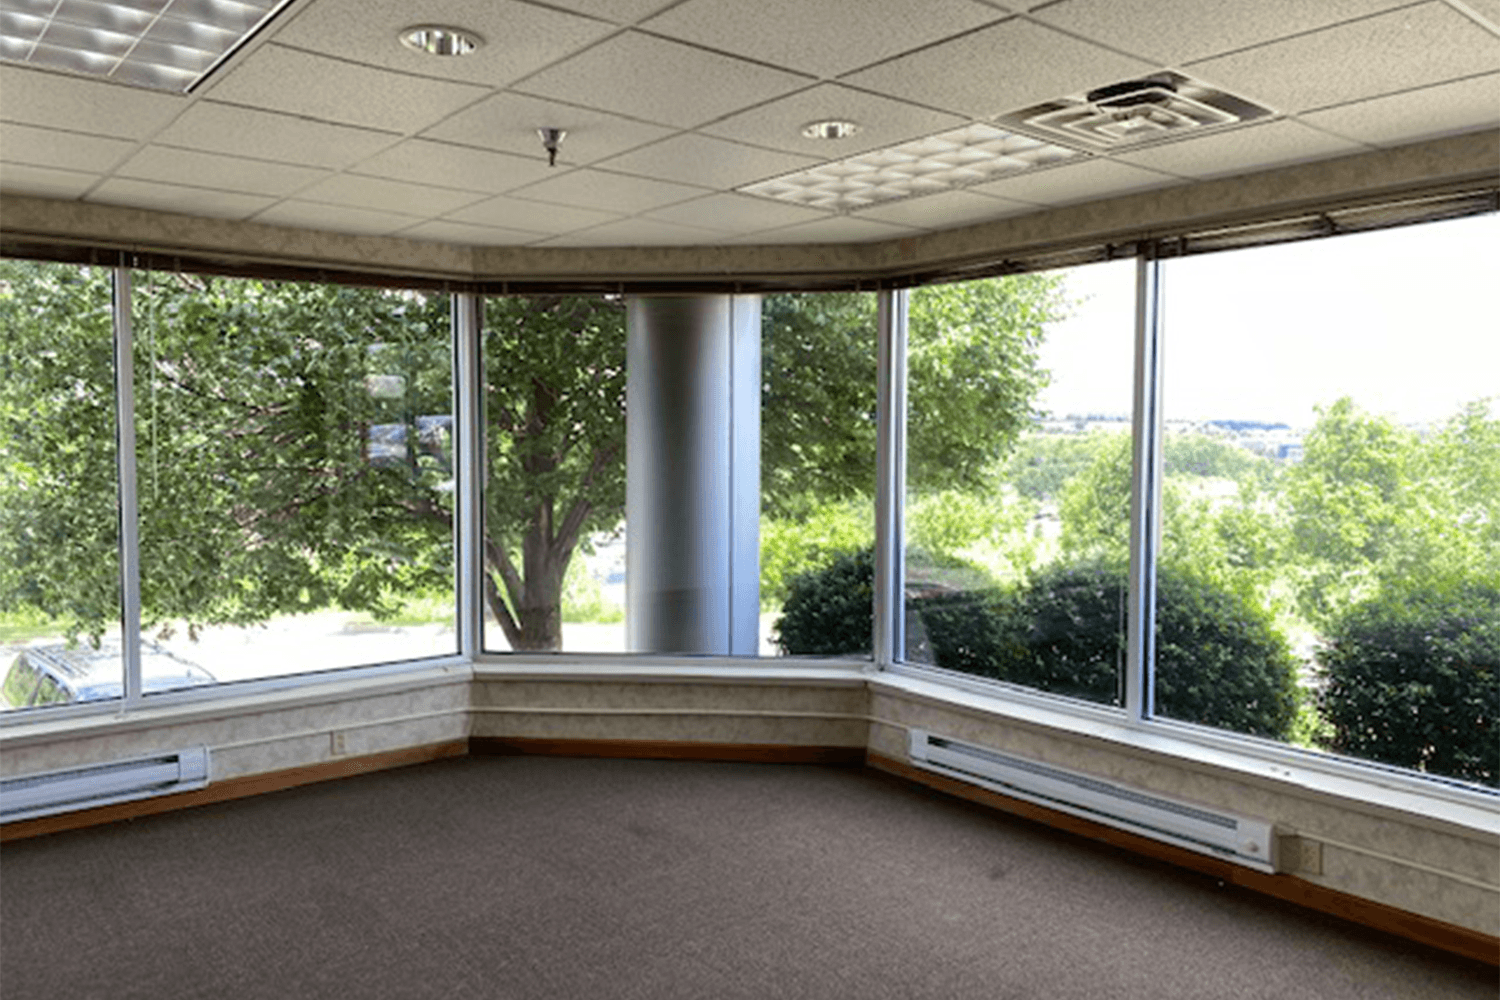 empty room with large windows that look out into trees and bushes